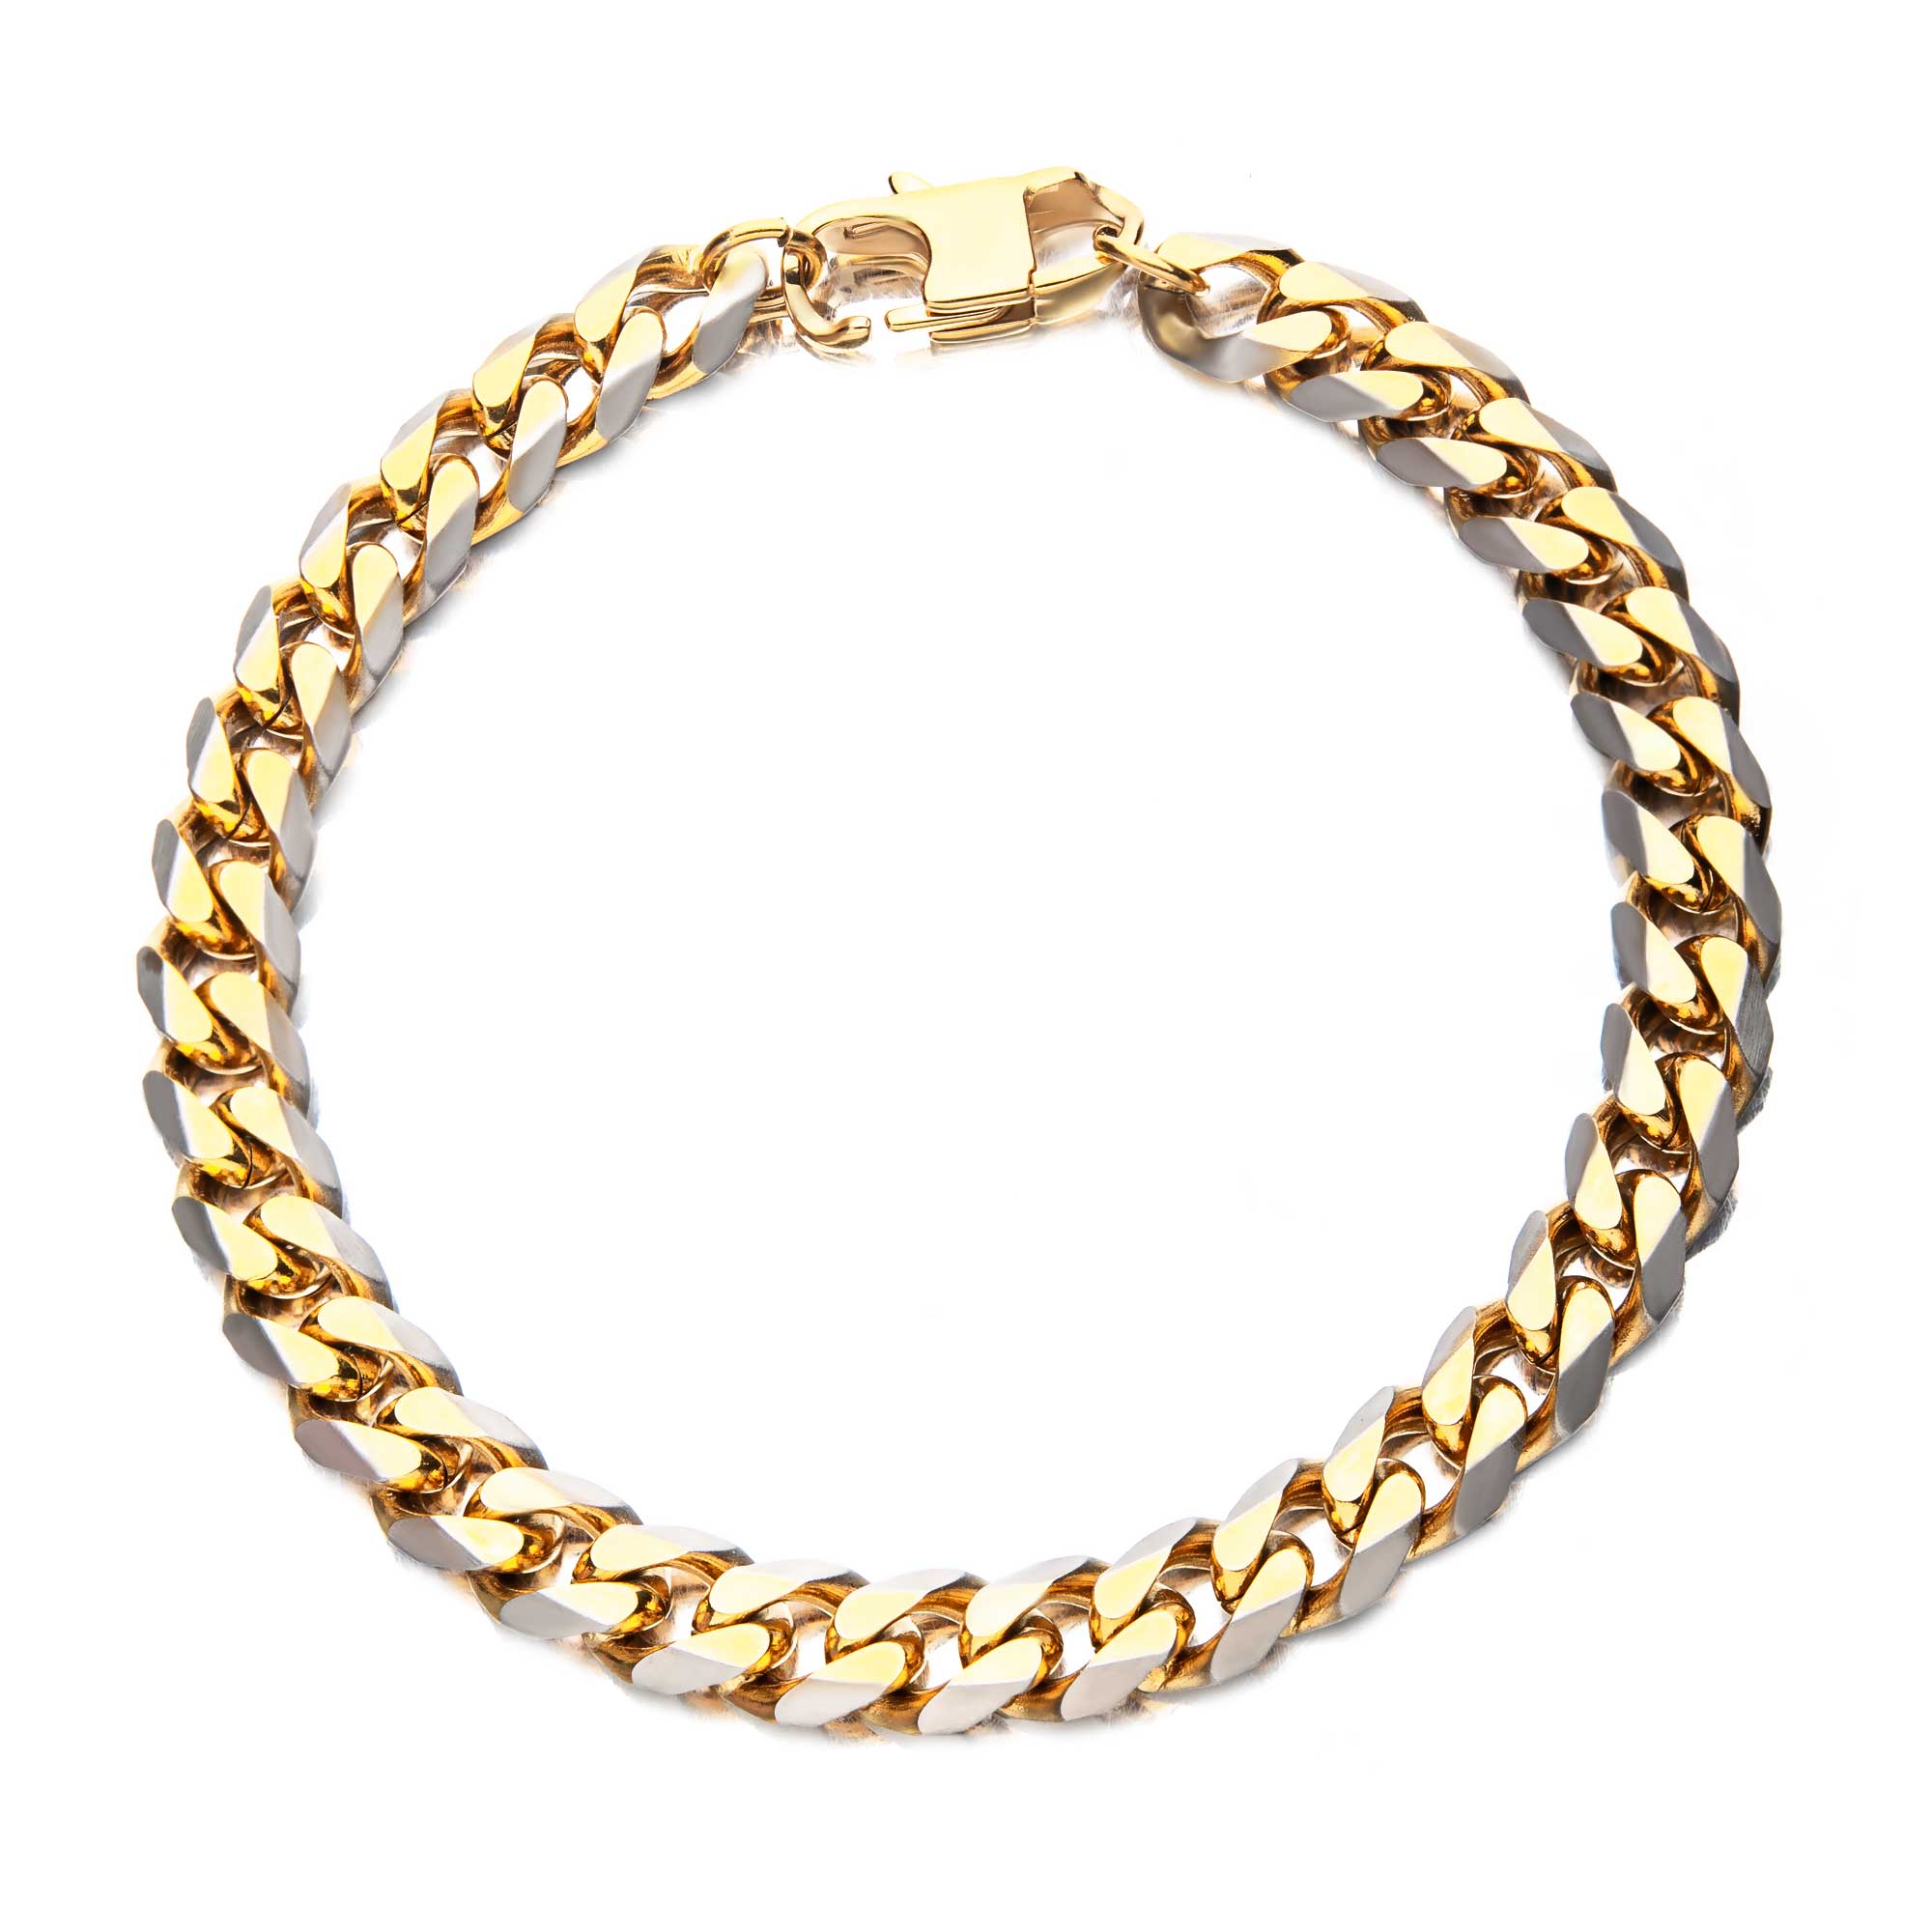 Stainless Steel Gold Plated 8mm Curb Chain with Lobster Clasp Image 2 Morin Jewelers Southbridge, MA